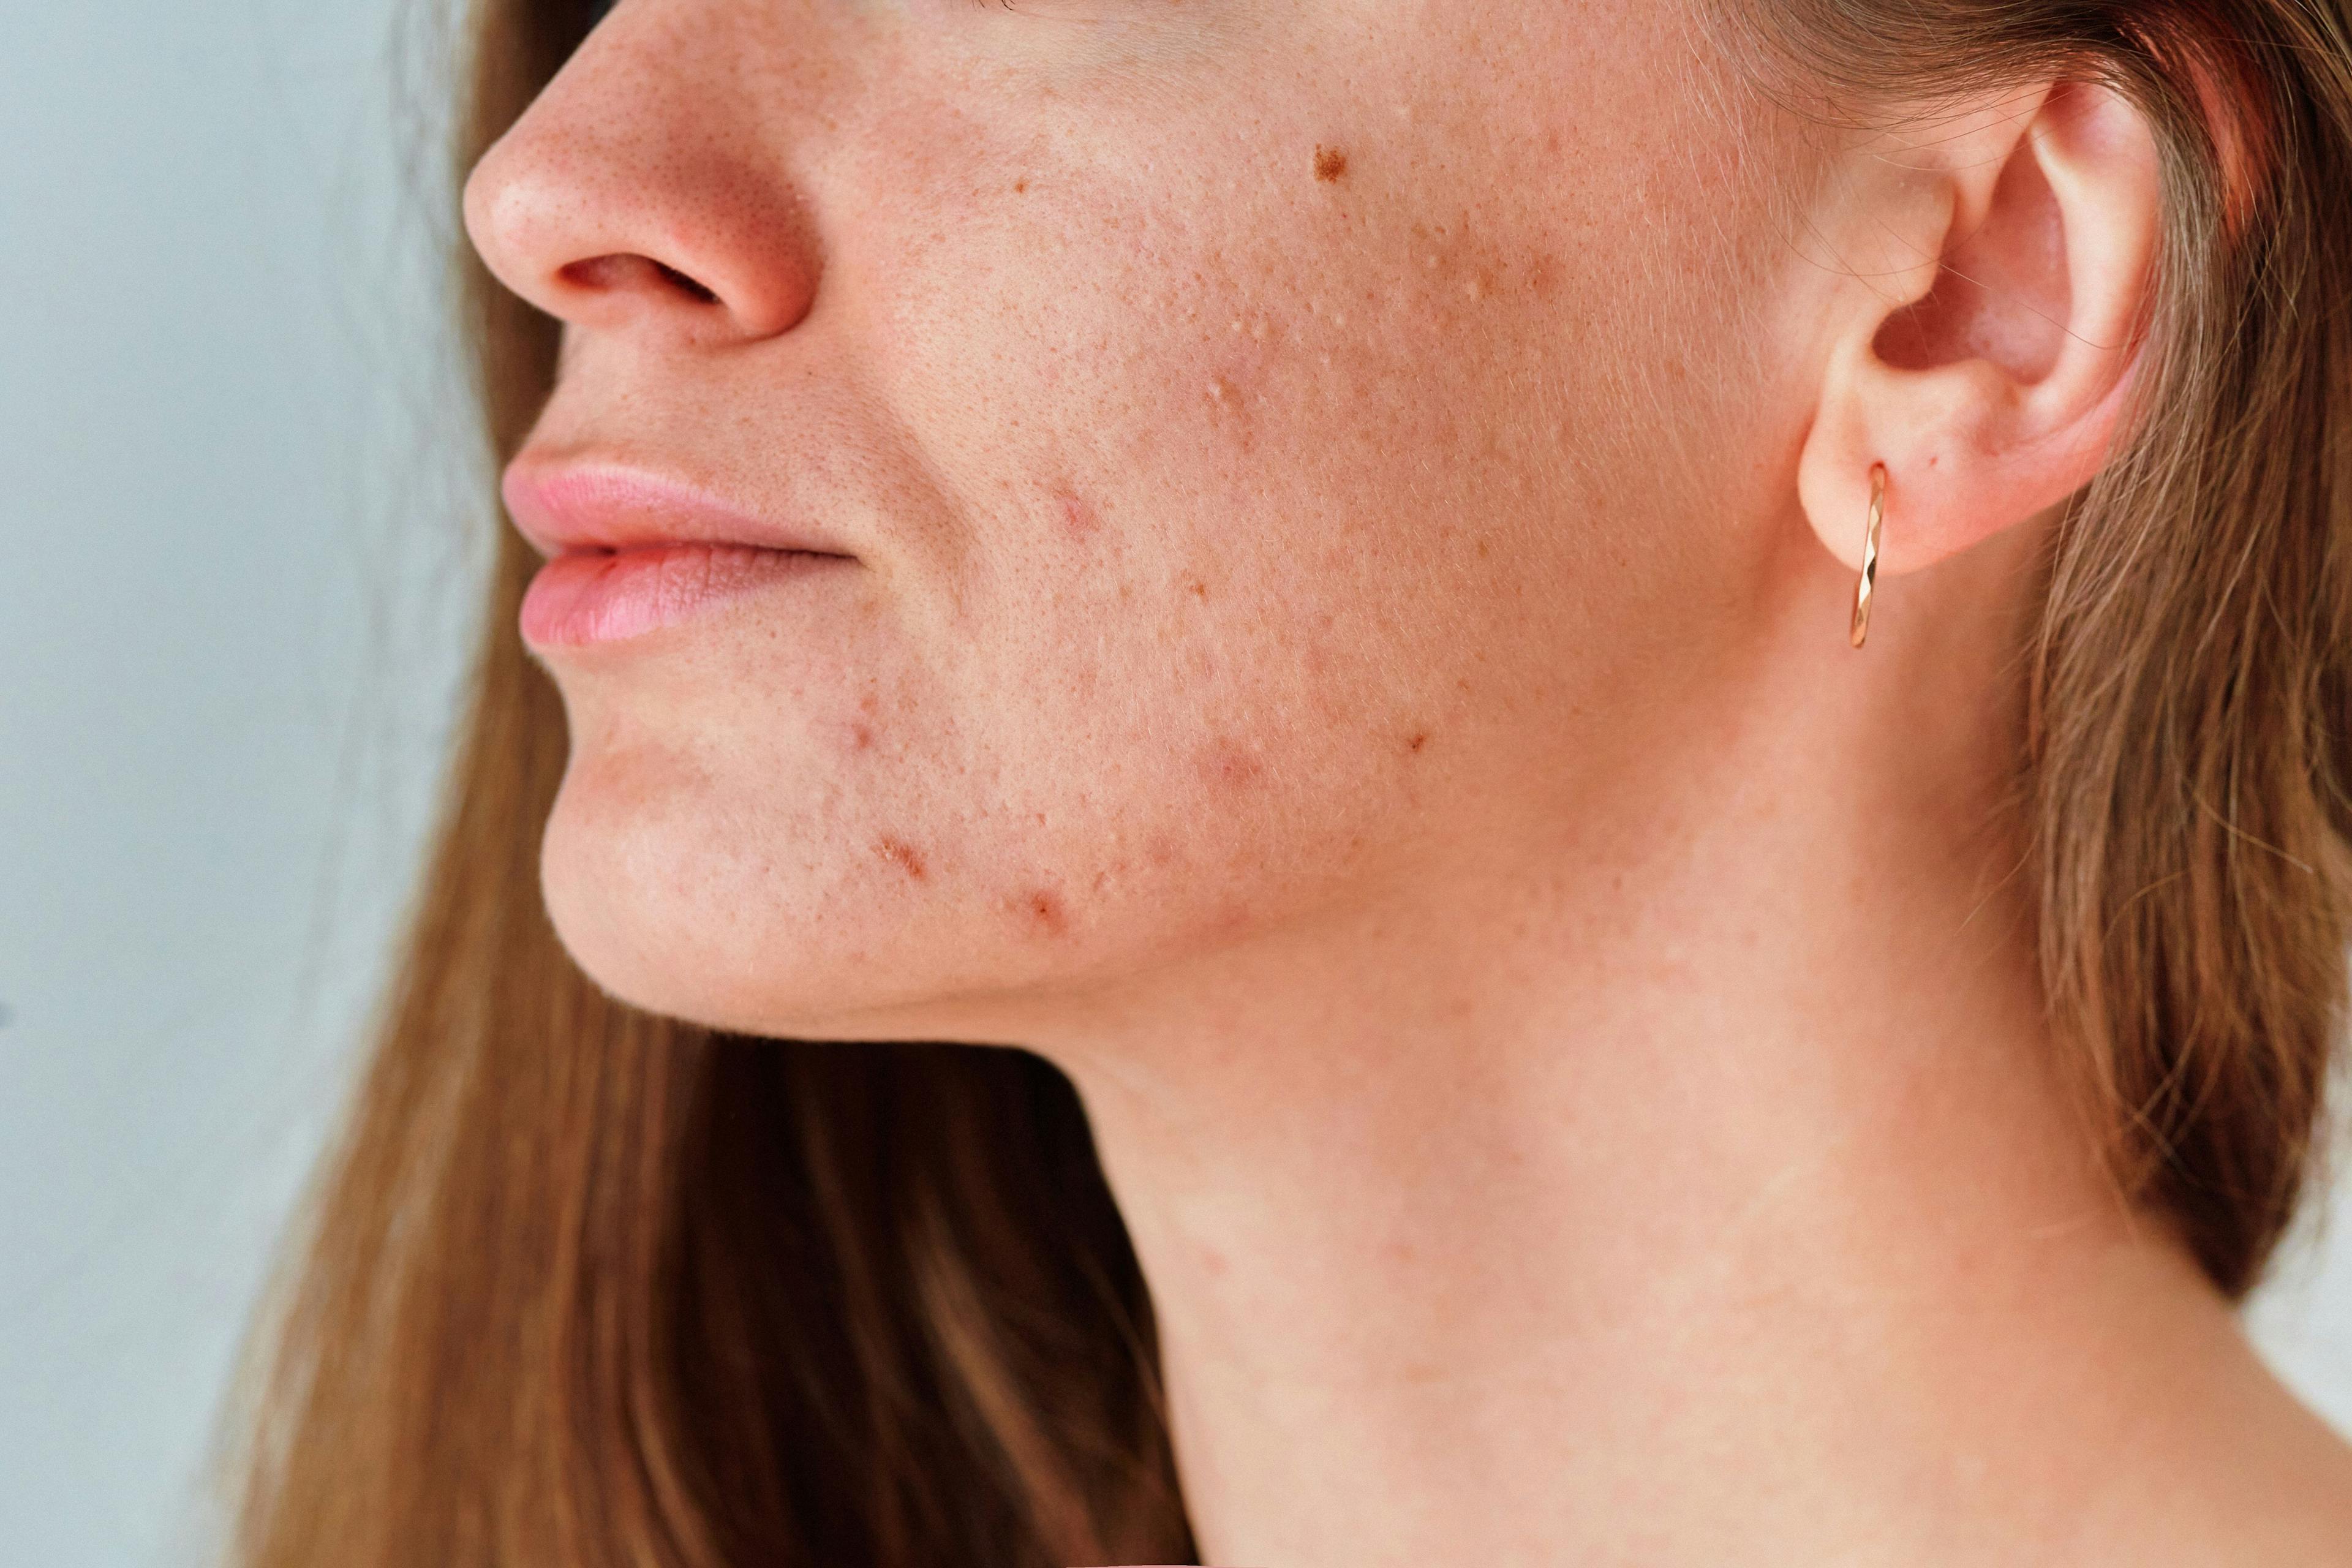 Individualized Treatment Considerations for Adult Women With Acne